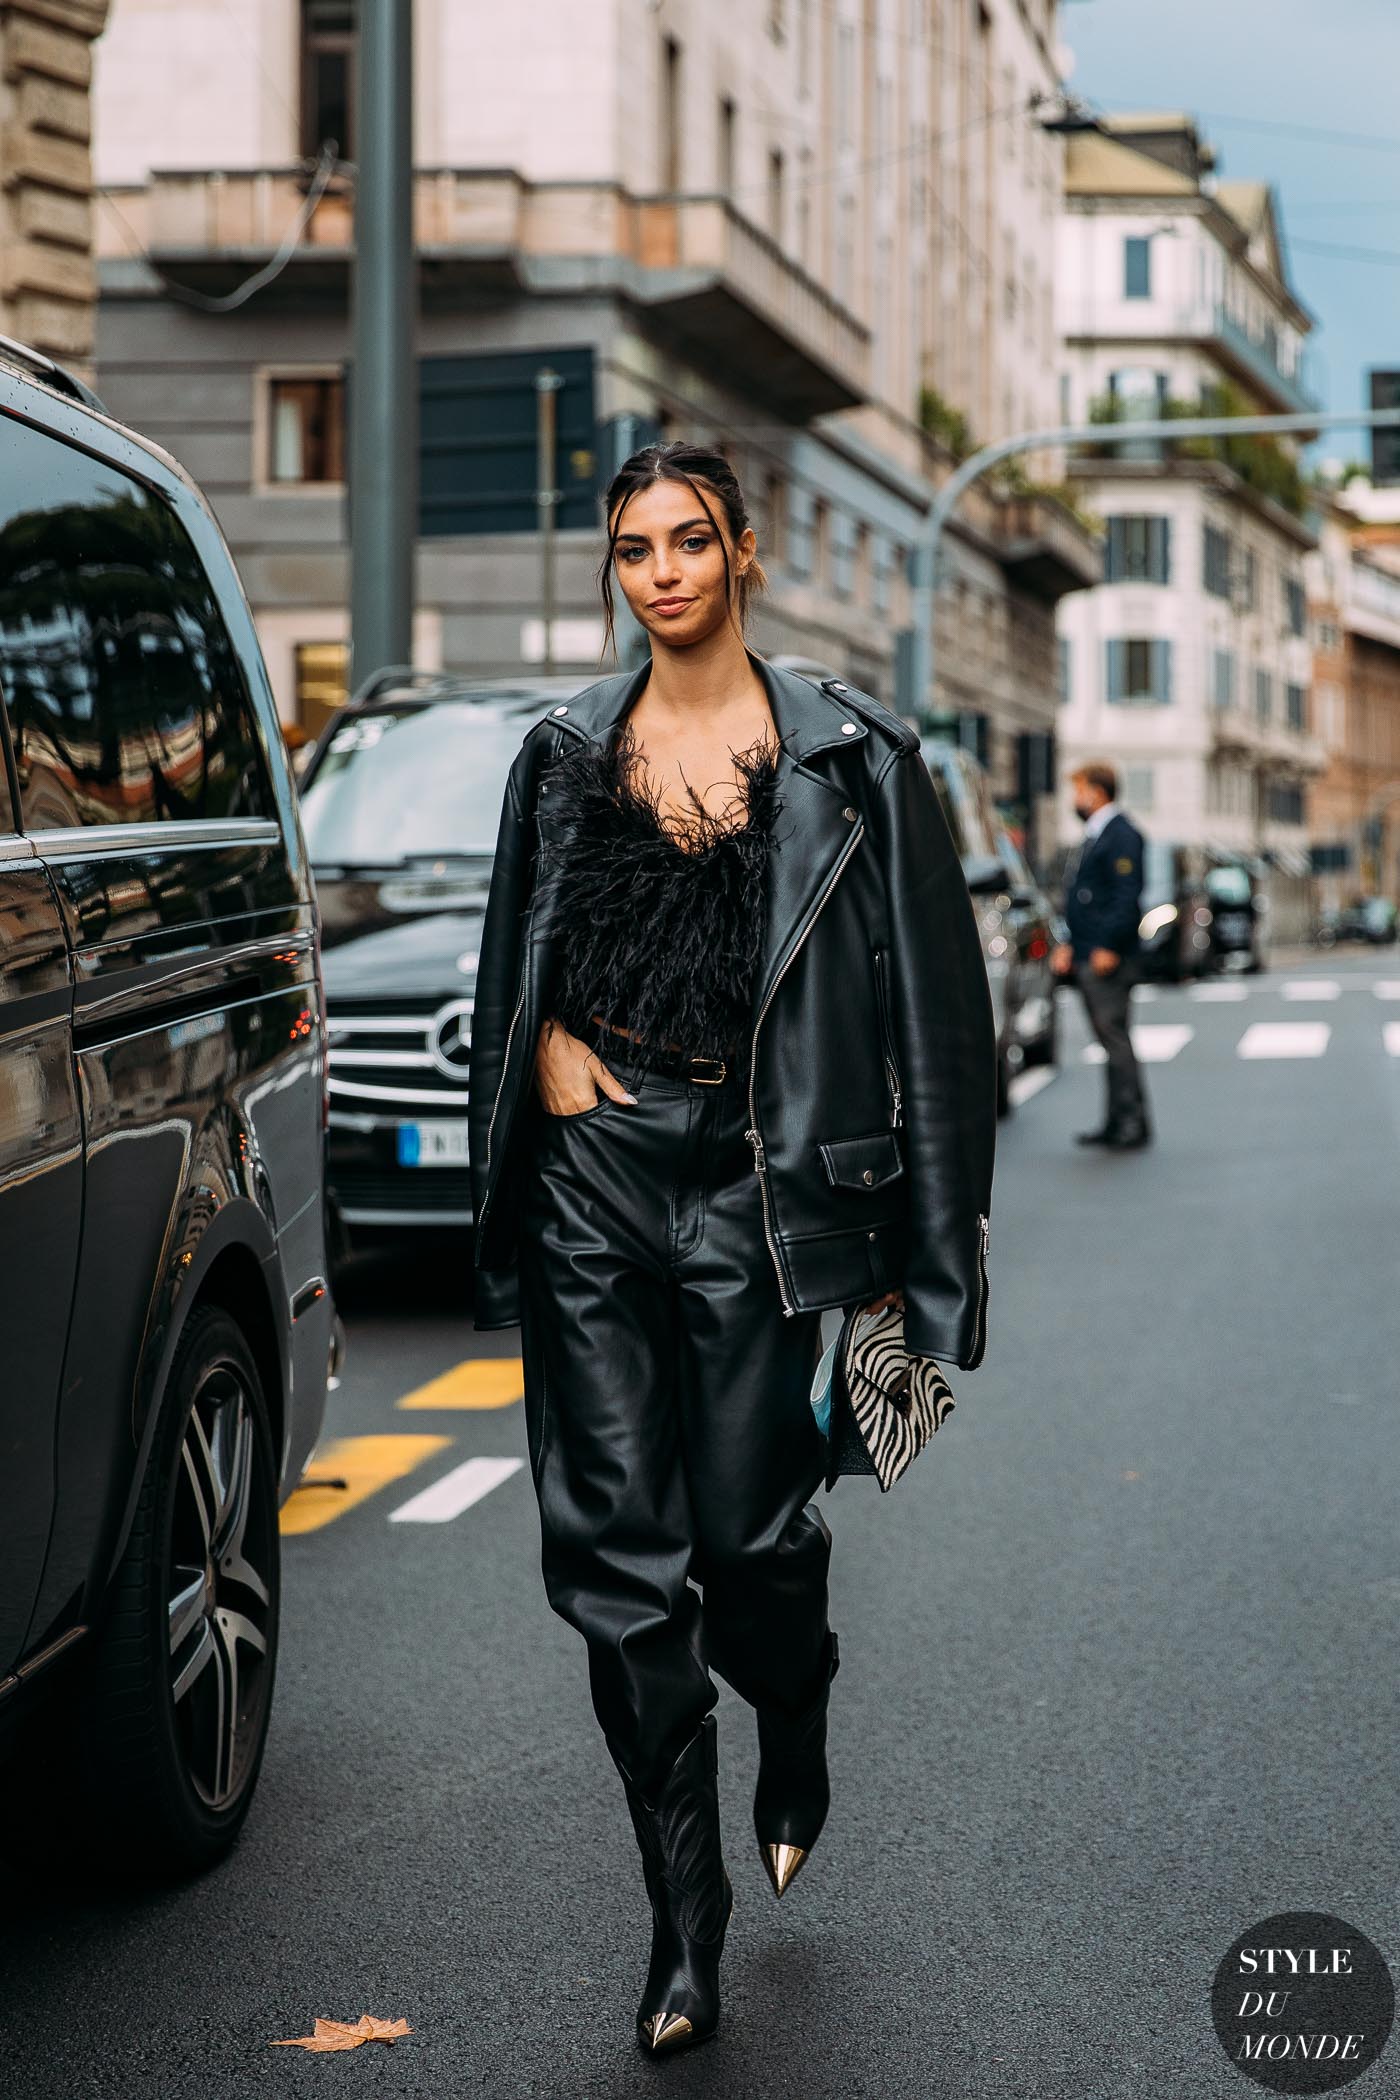 https://www.styledumonde.com/wp-content/uploads/2020/12/Milan-SS21-day-3-by-STYLEDUMONDE-Street-Style-Fashion-Photography_95A9461.jpg